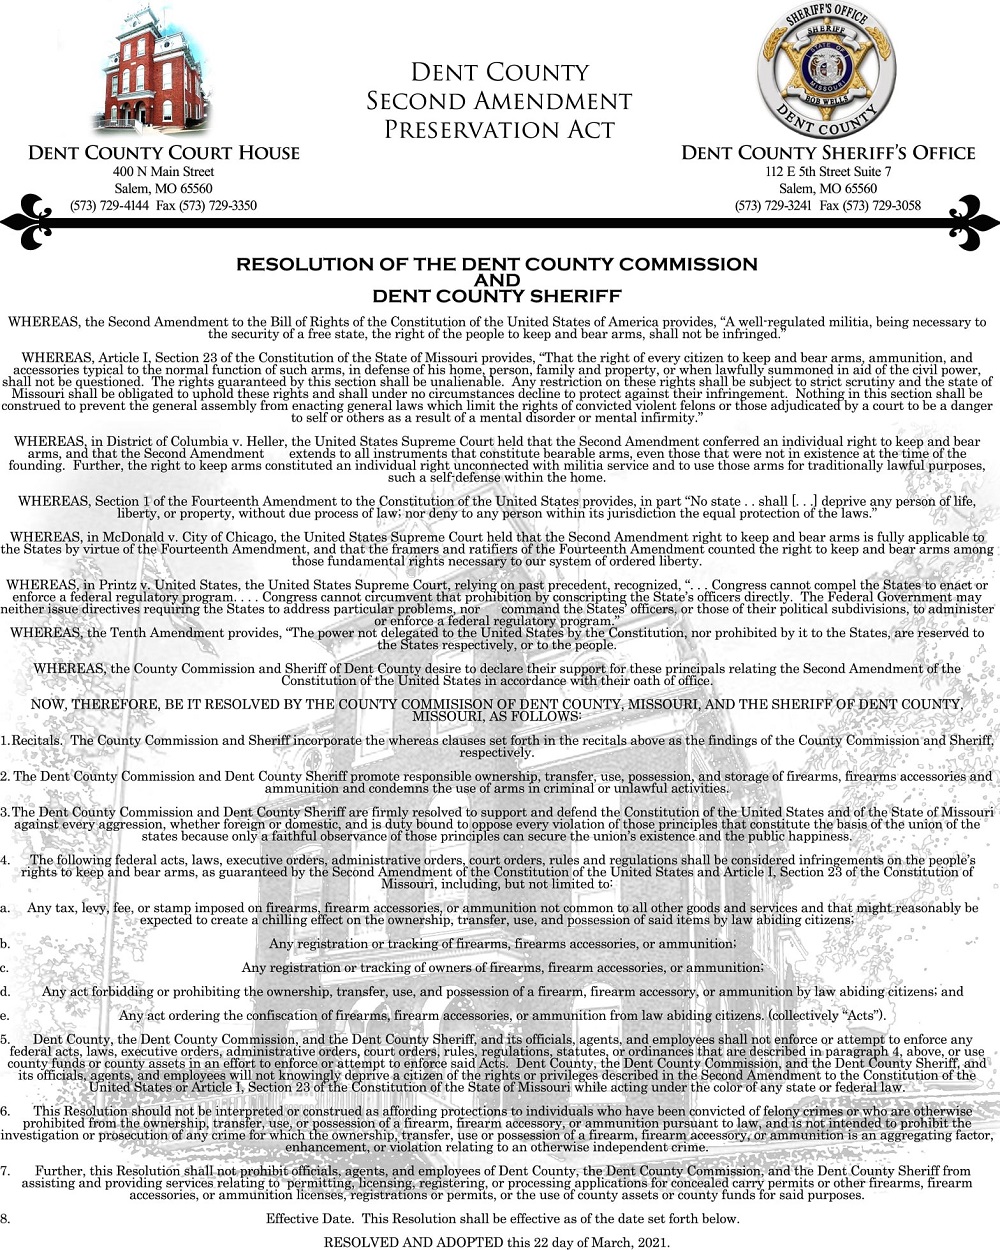 Dent County Second Amendment Preservation Act Page 1